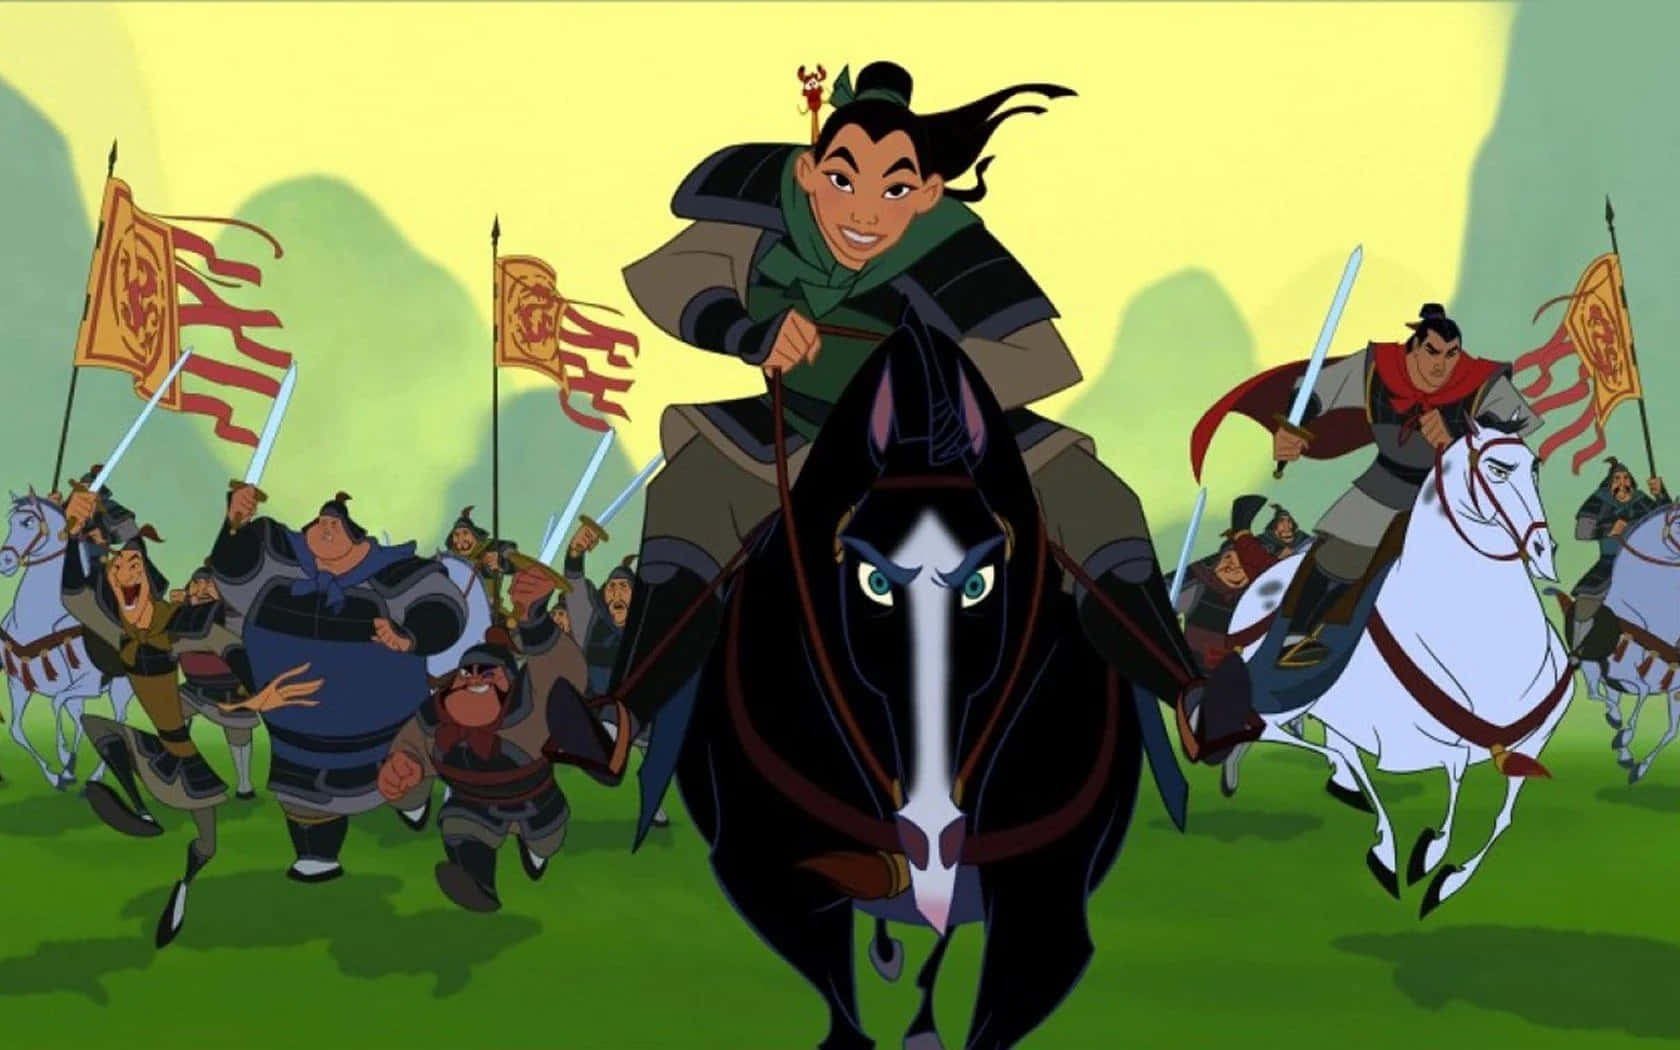 Mulan casts a strong impression in Disney's classic animated film.